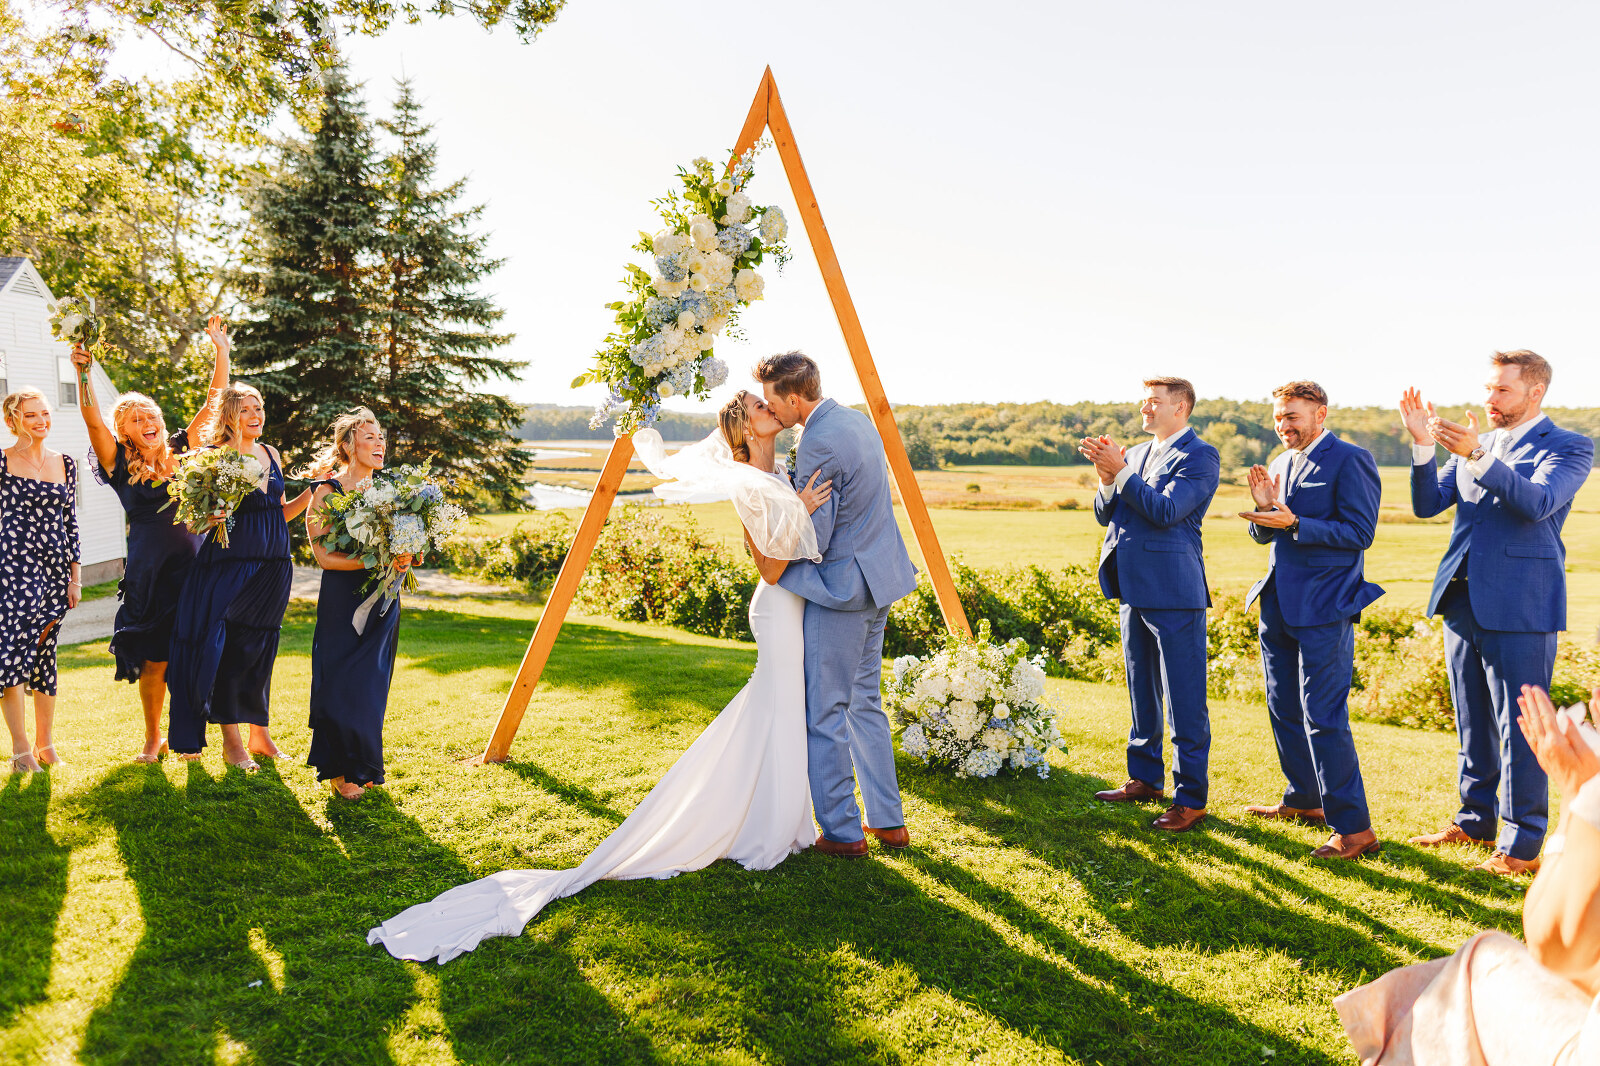 Bride and groom first kiss in front of triangle alter